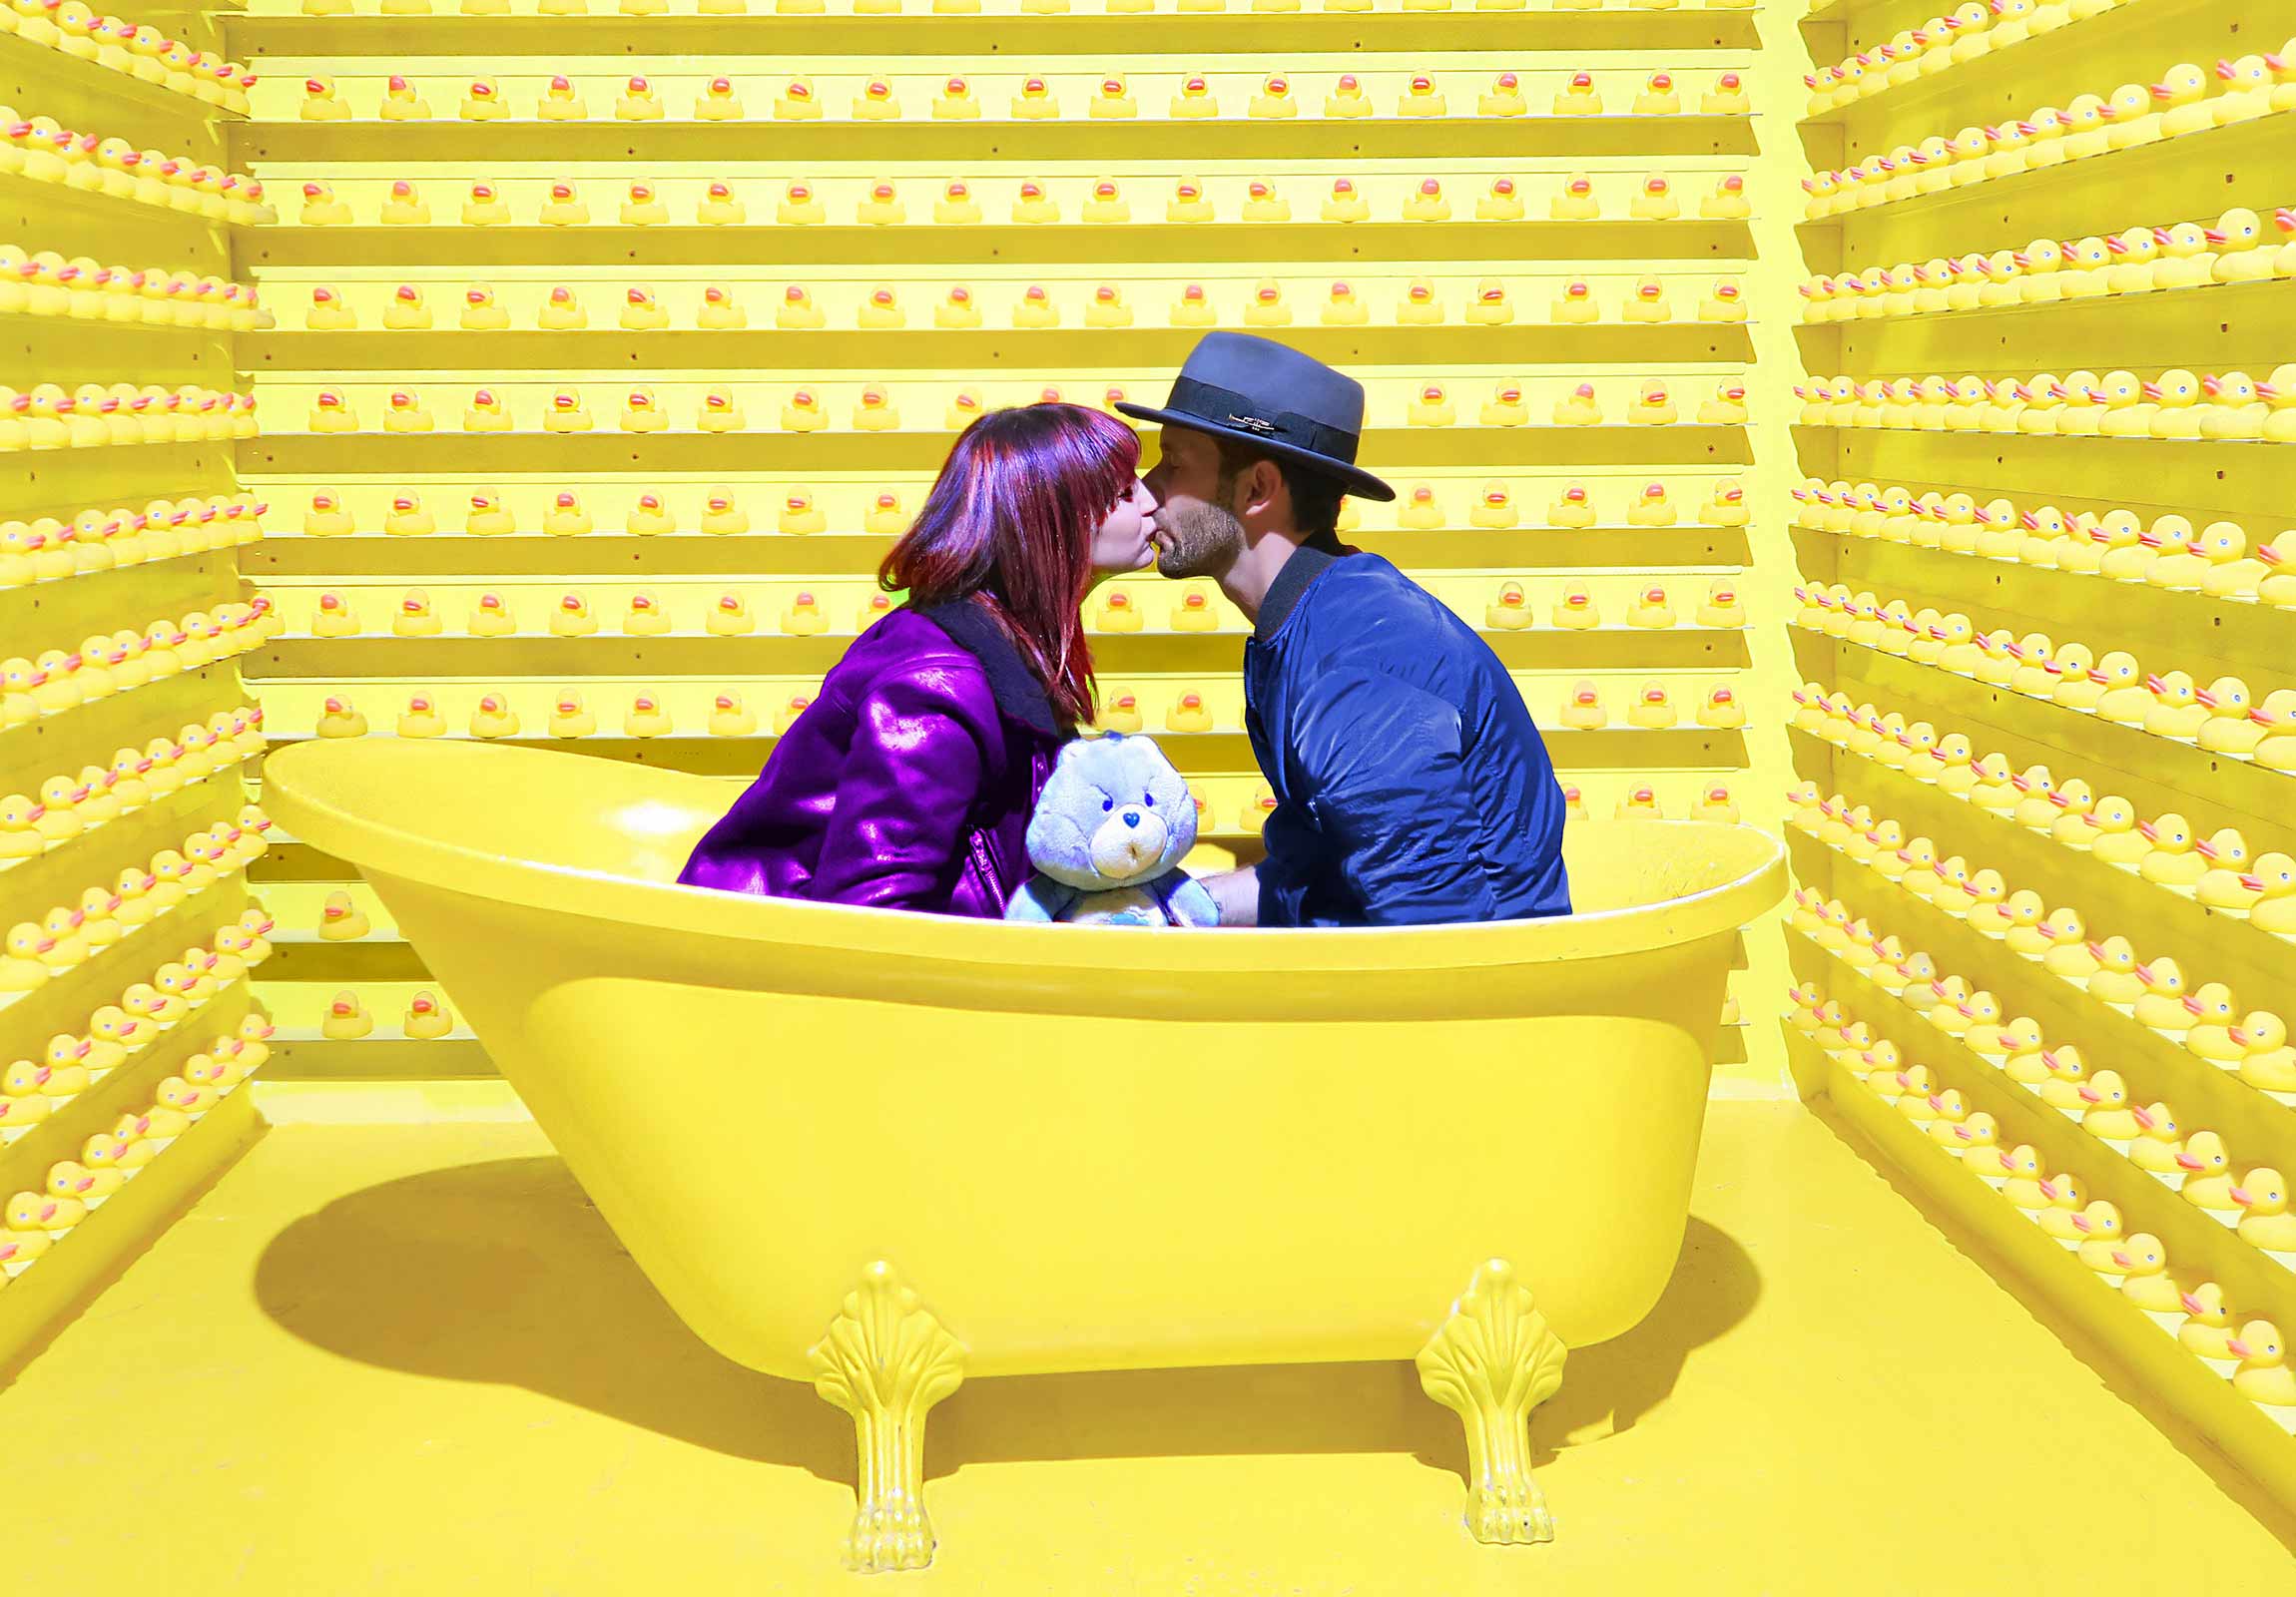 Two people in a yellow room, kissing in a bathtub